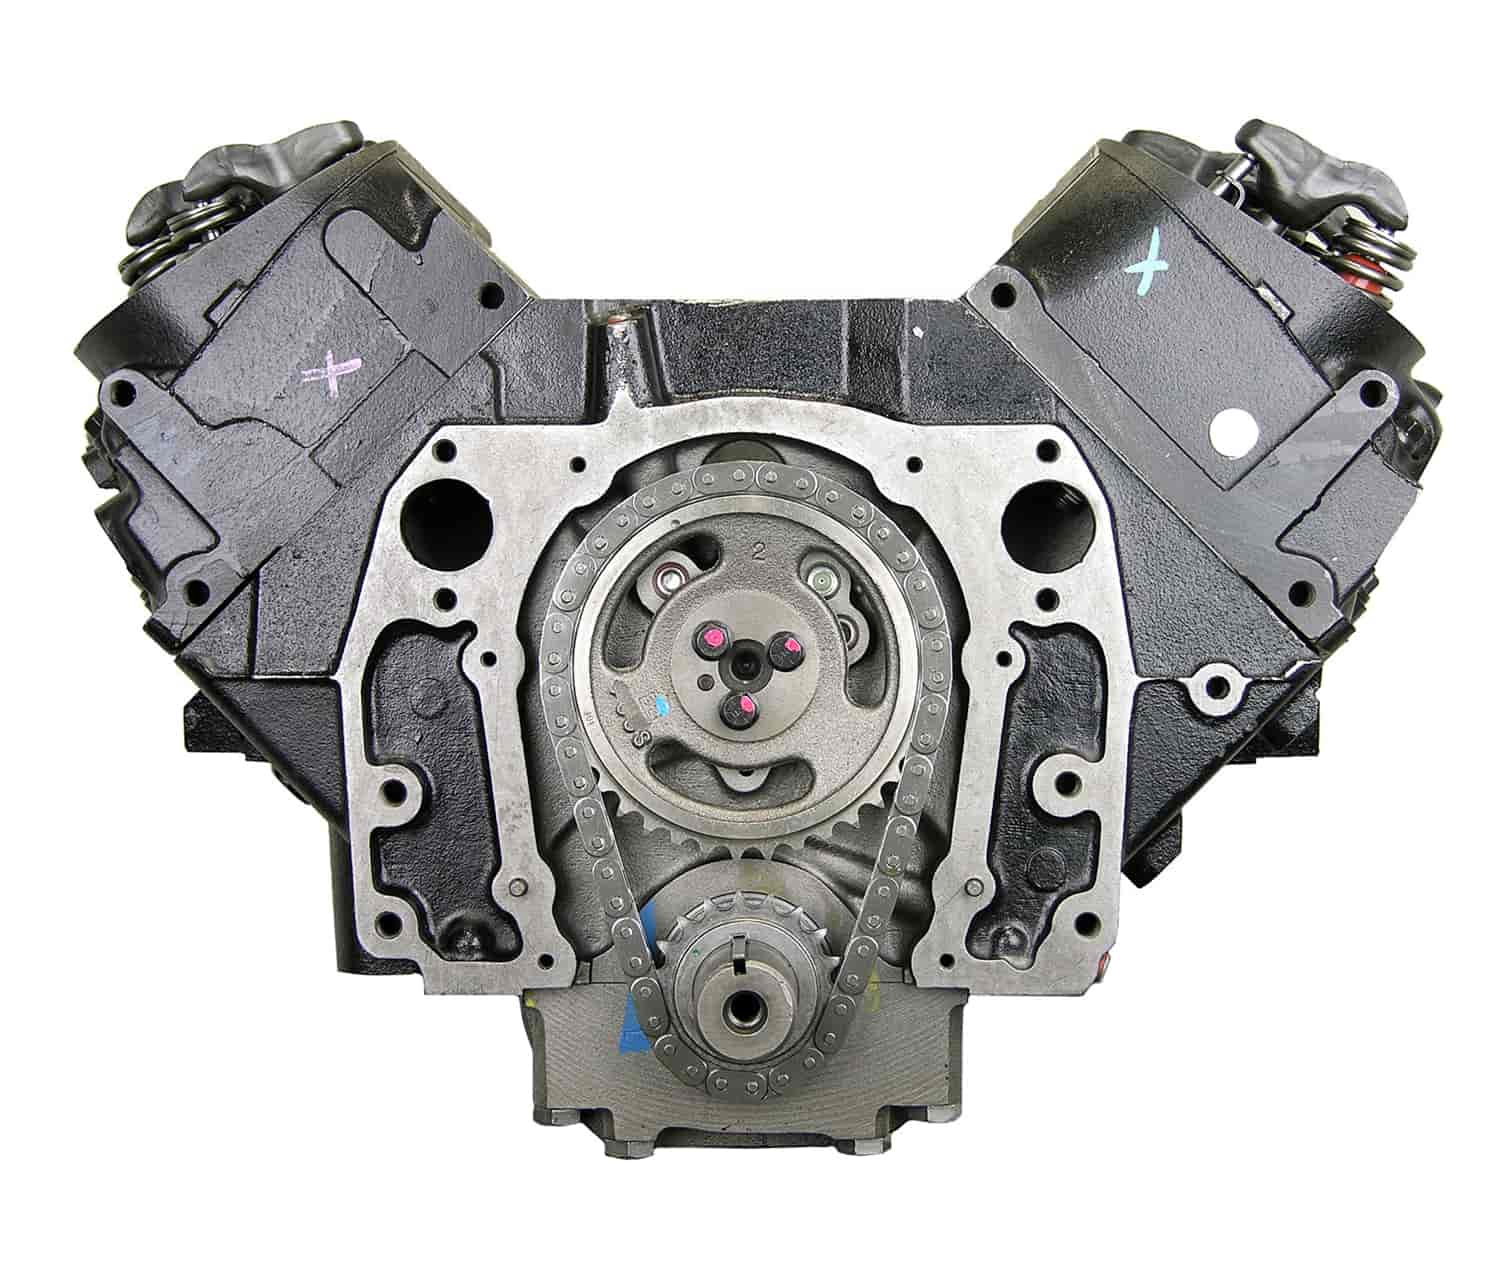 Remanufactured Crate Engine for 1996-1998 Chevy/GMC Medium Duty Trucks with 427ci V8